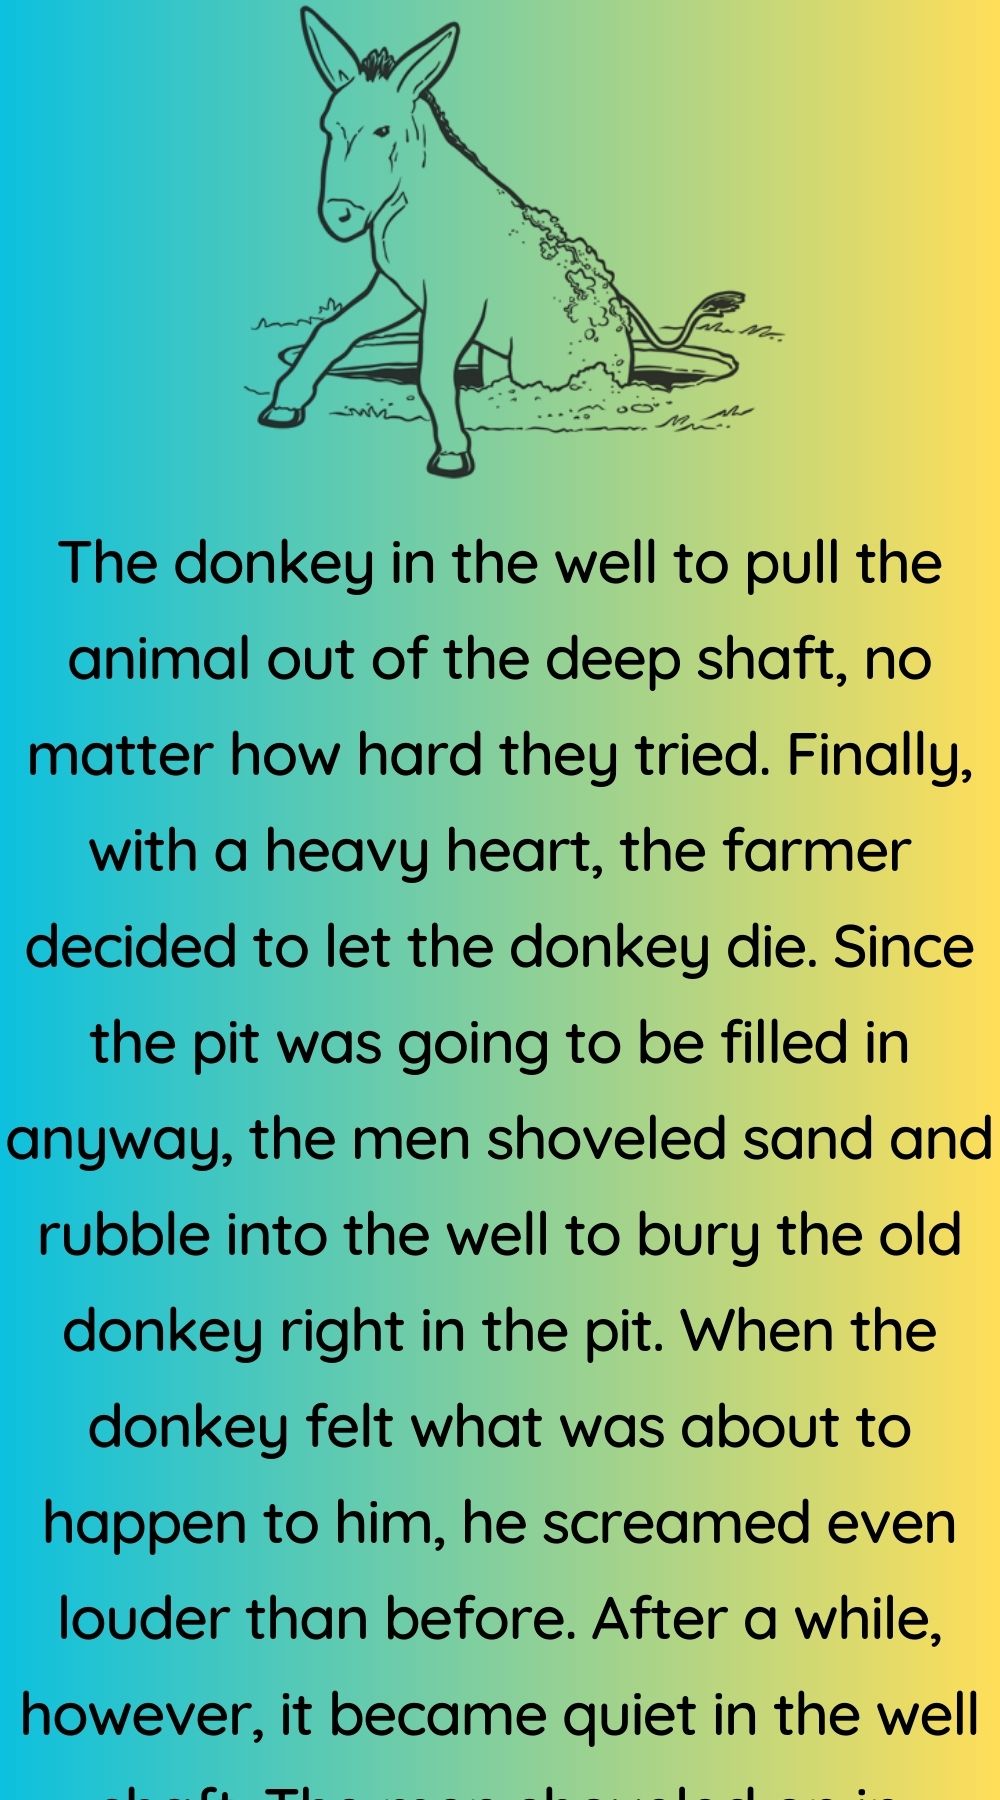 The donkey in the well 